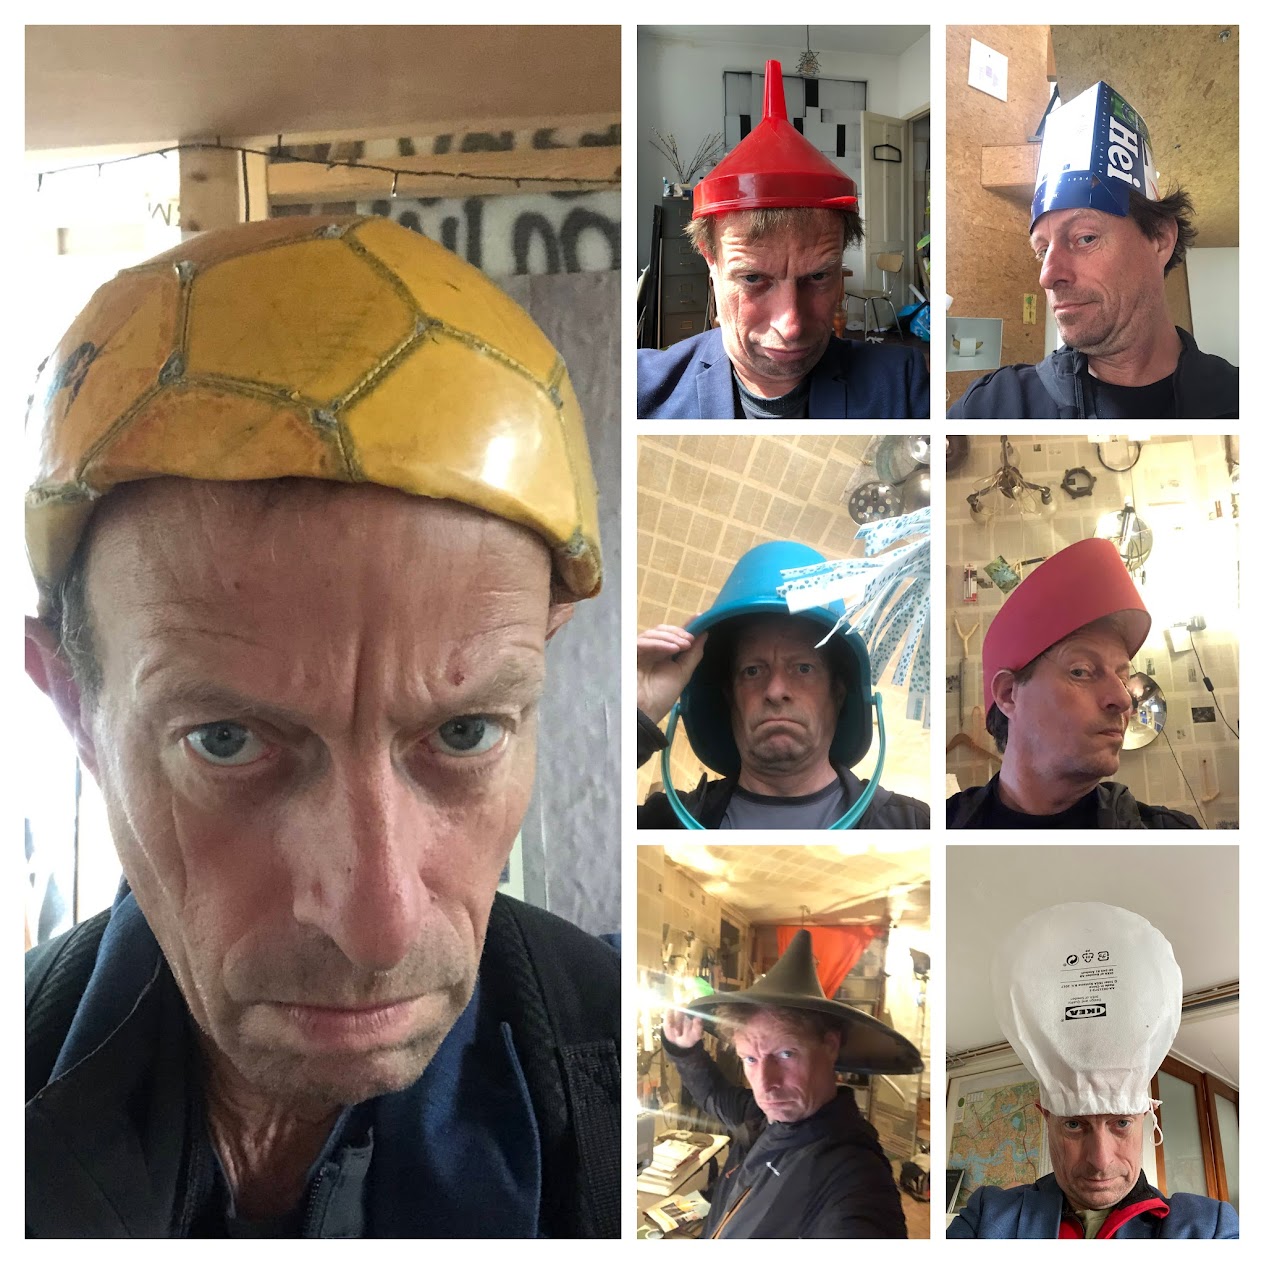 Helmets and Silly Hats